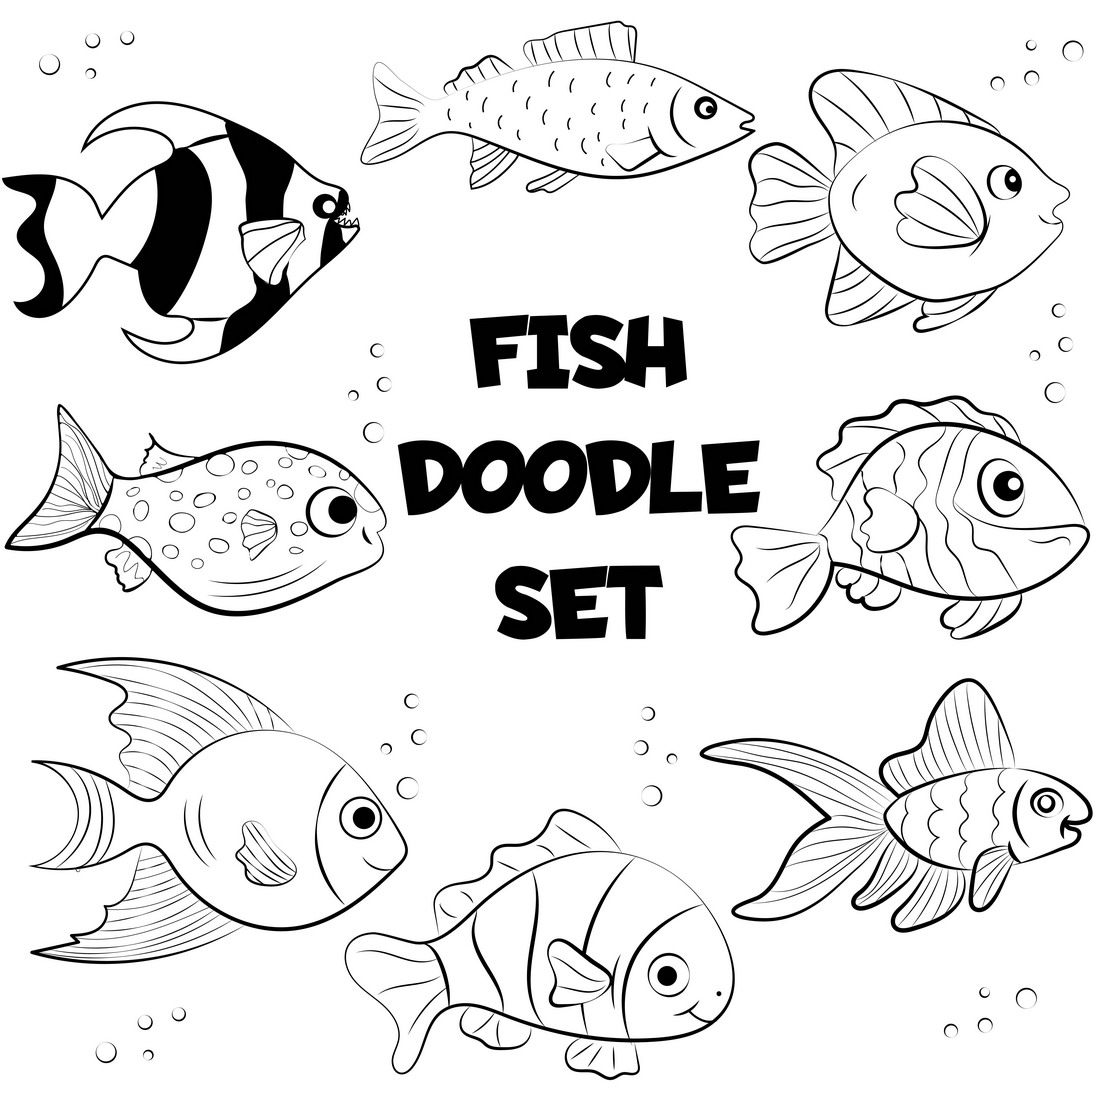 Nice Fish Doodle Set Illustrations cover image.